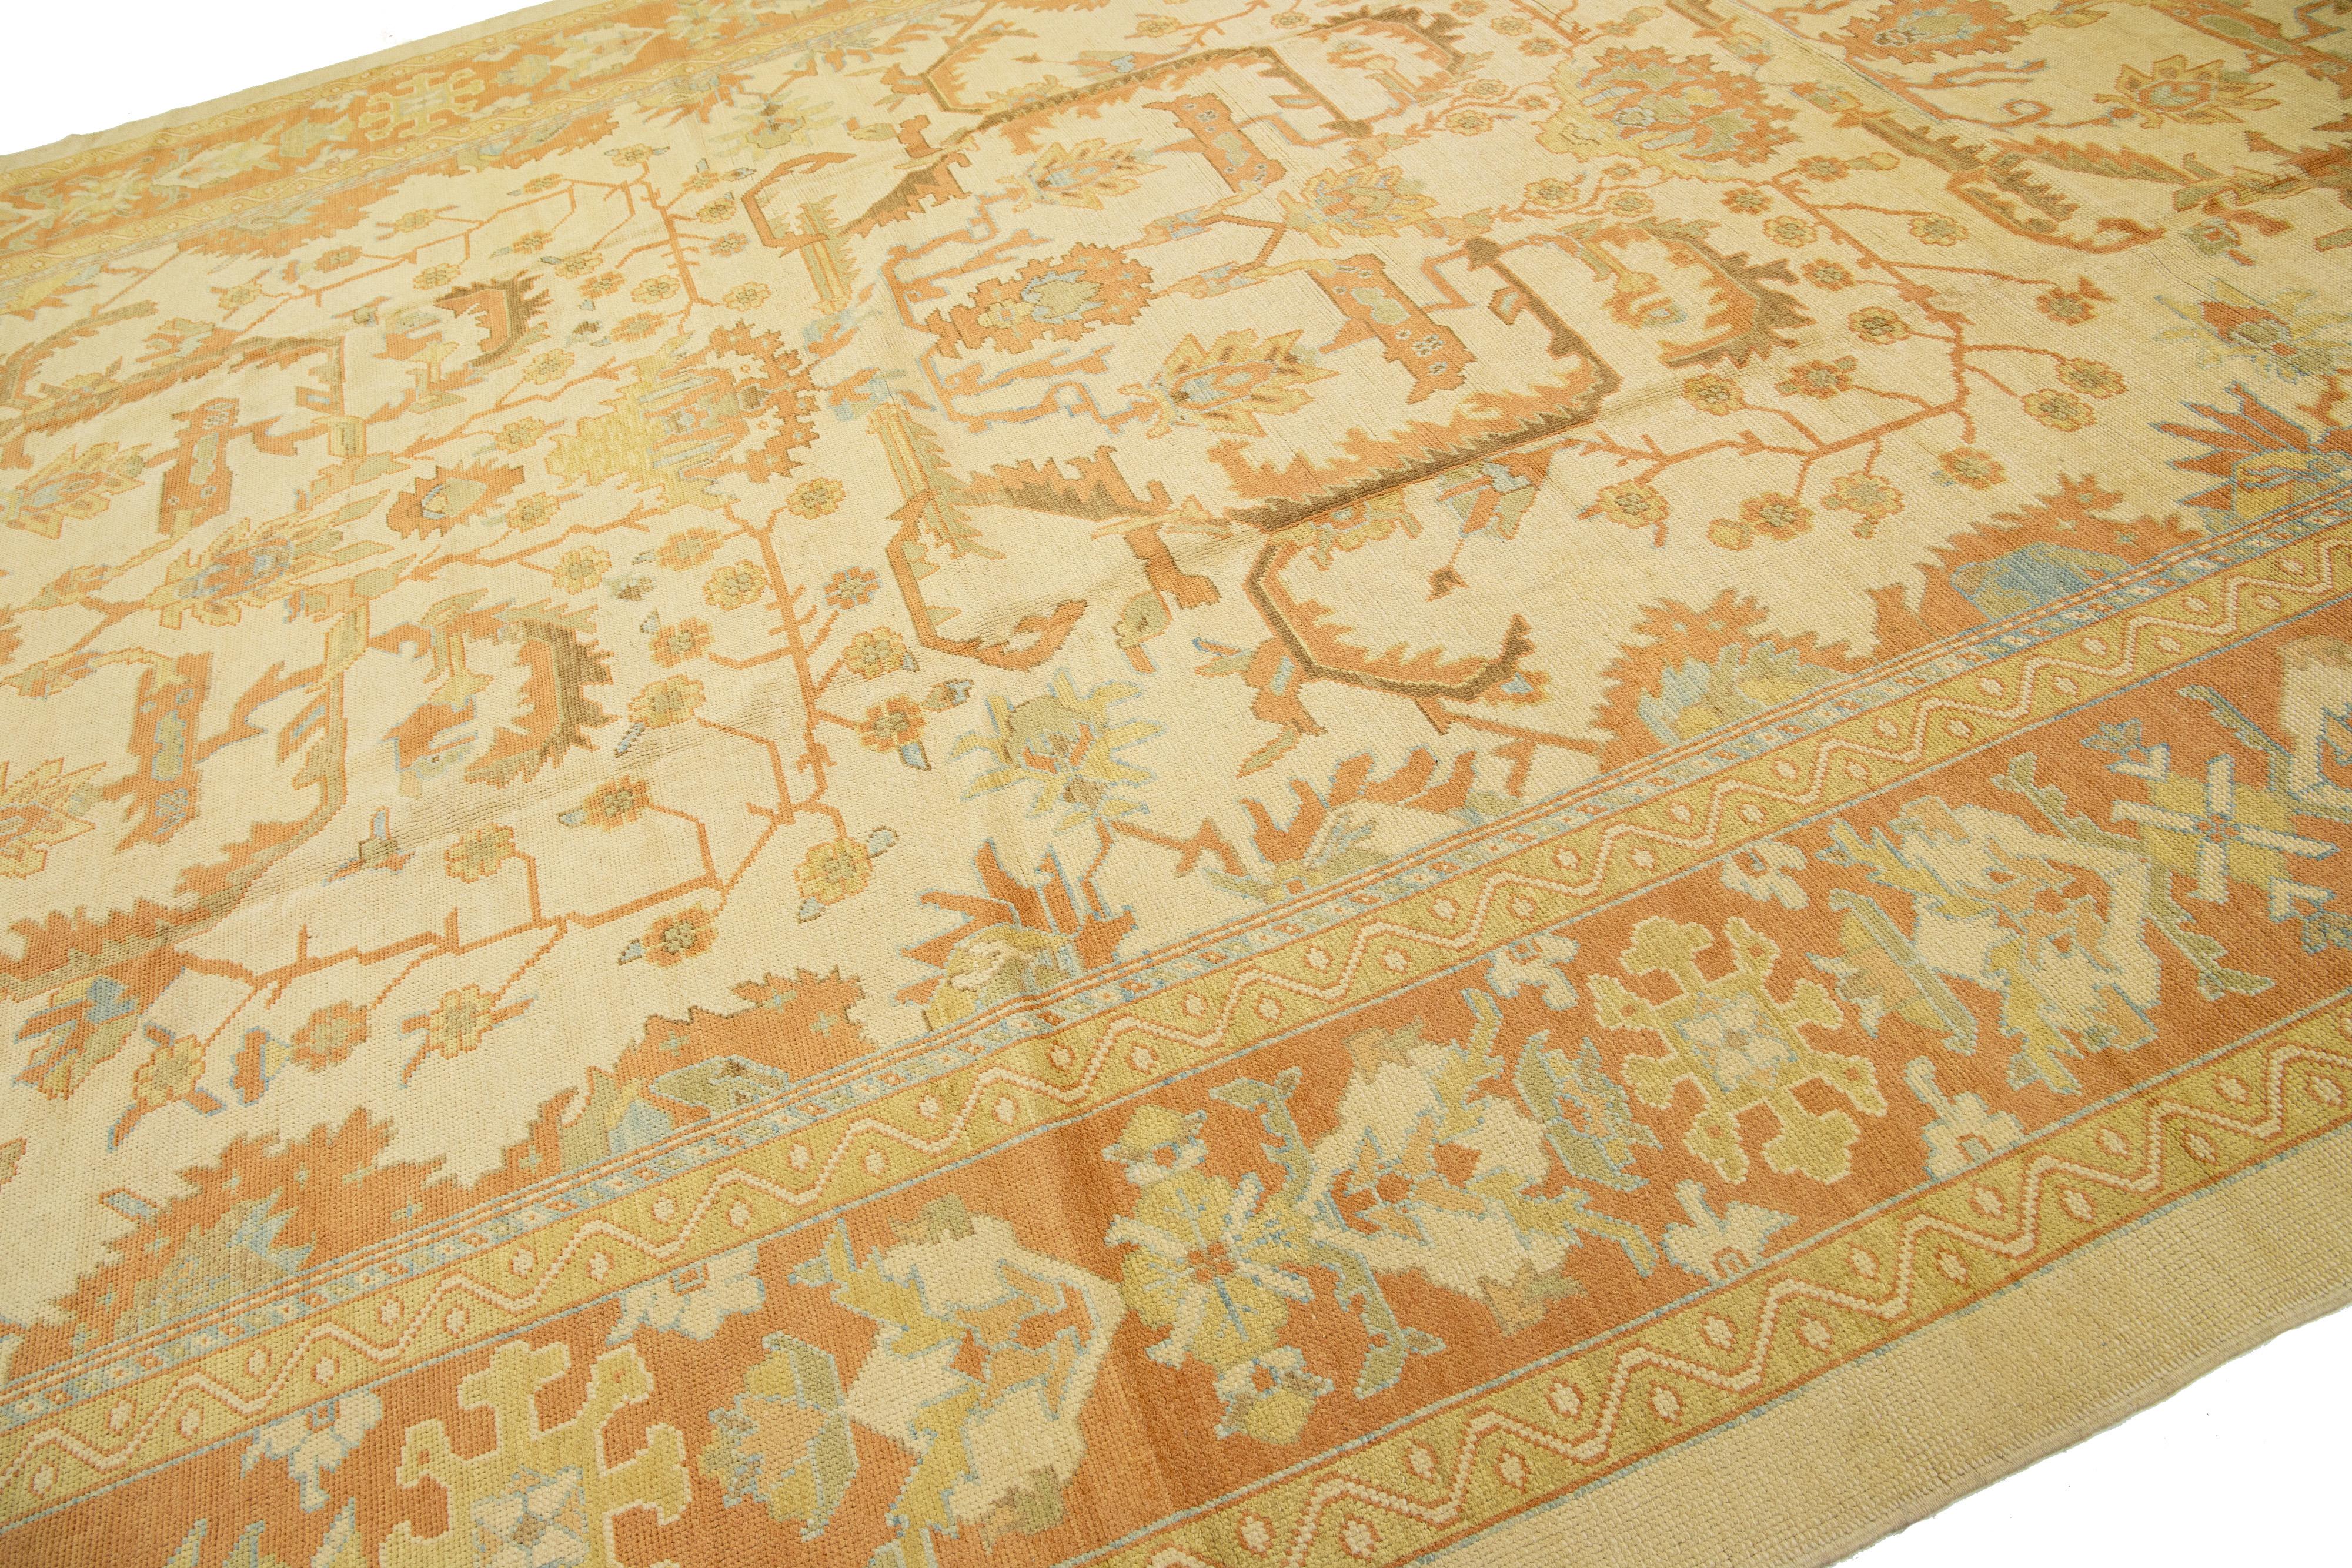 The modern Oushak rug from Turkey described here is hand-knotted. It showcases a beige background, alongside complex floral designs in peach and blue hues.

This rug measures 12'5